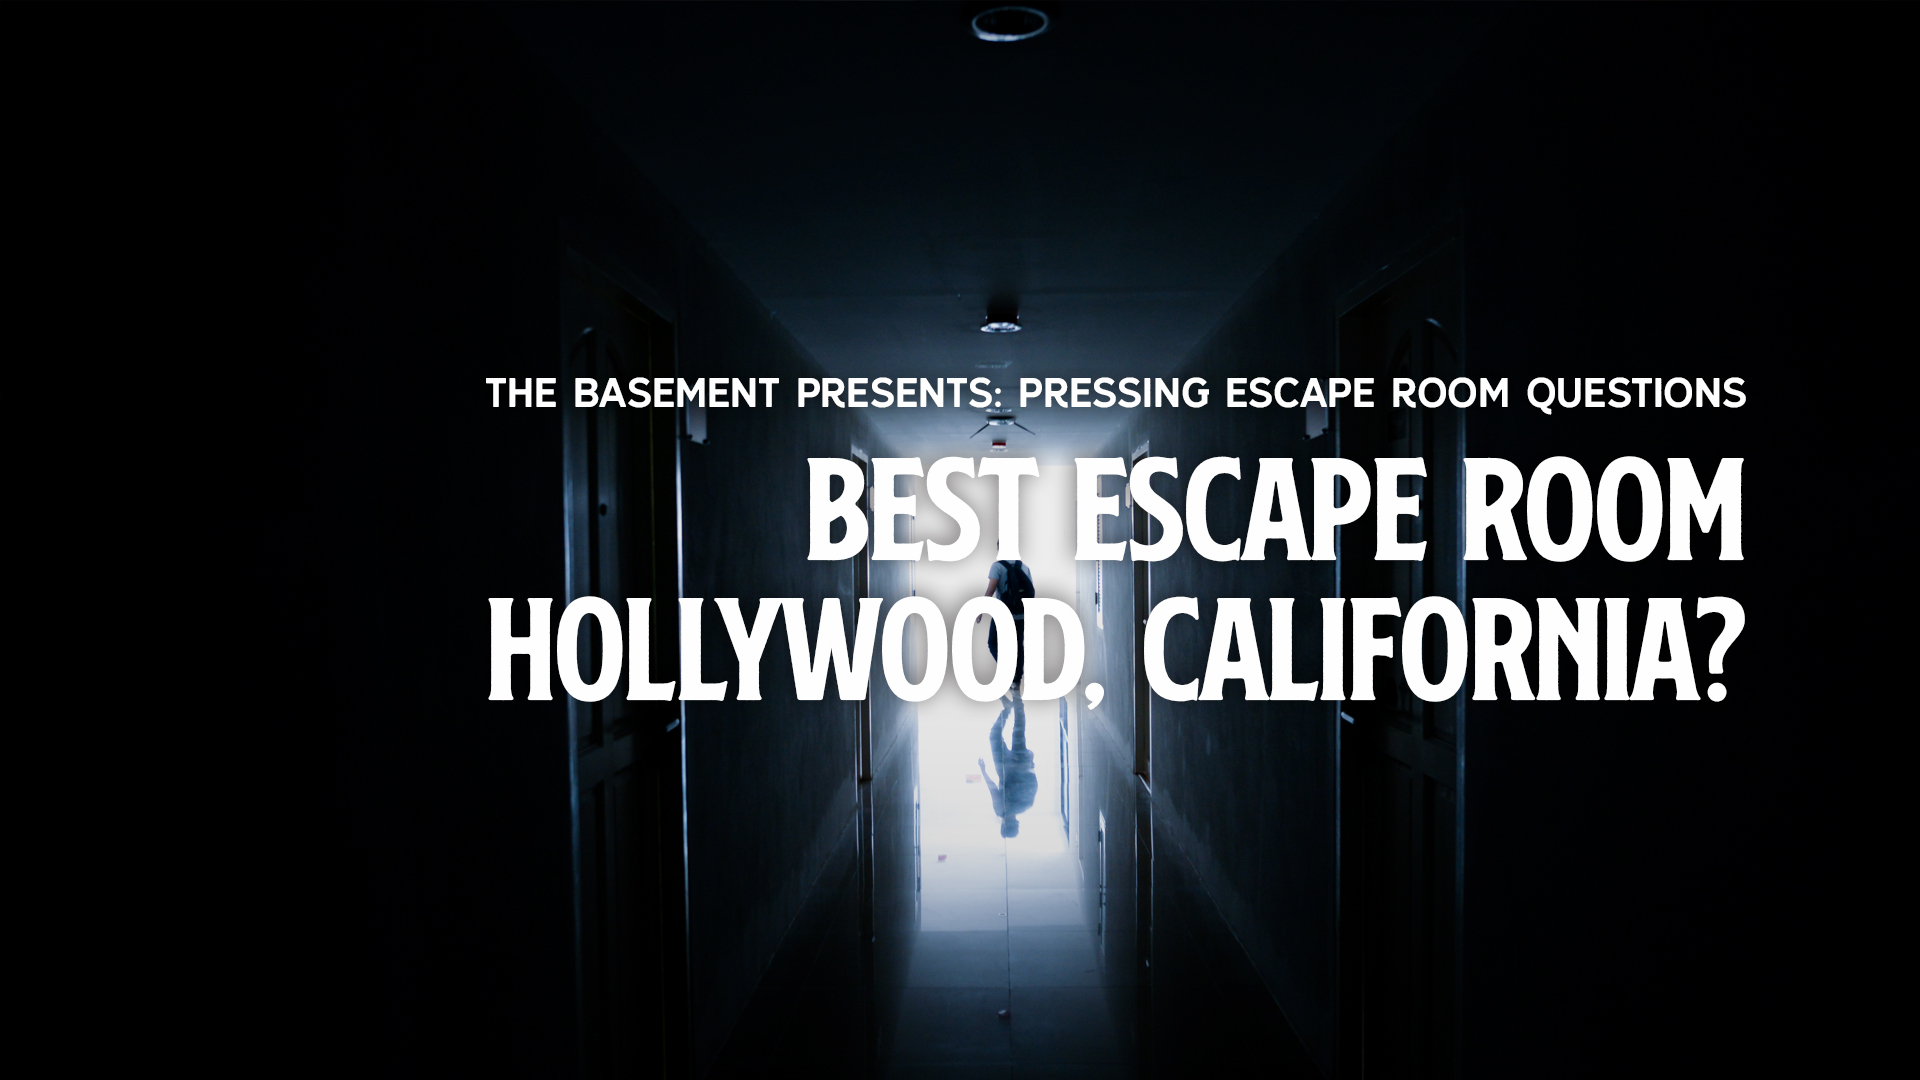 Best Escape Room Hollywood, California